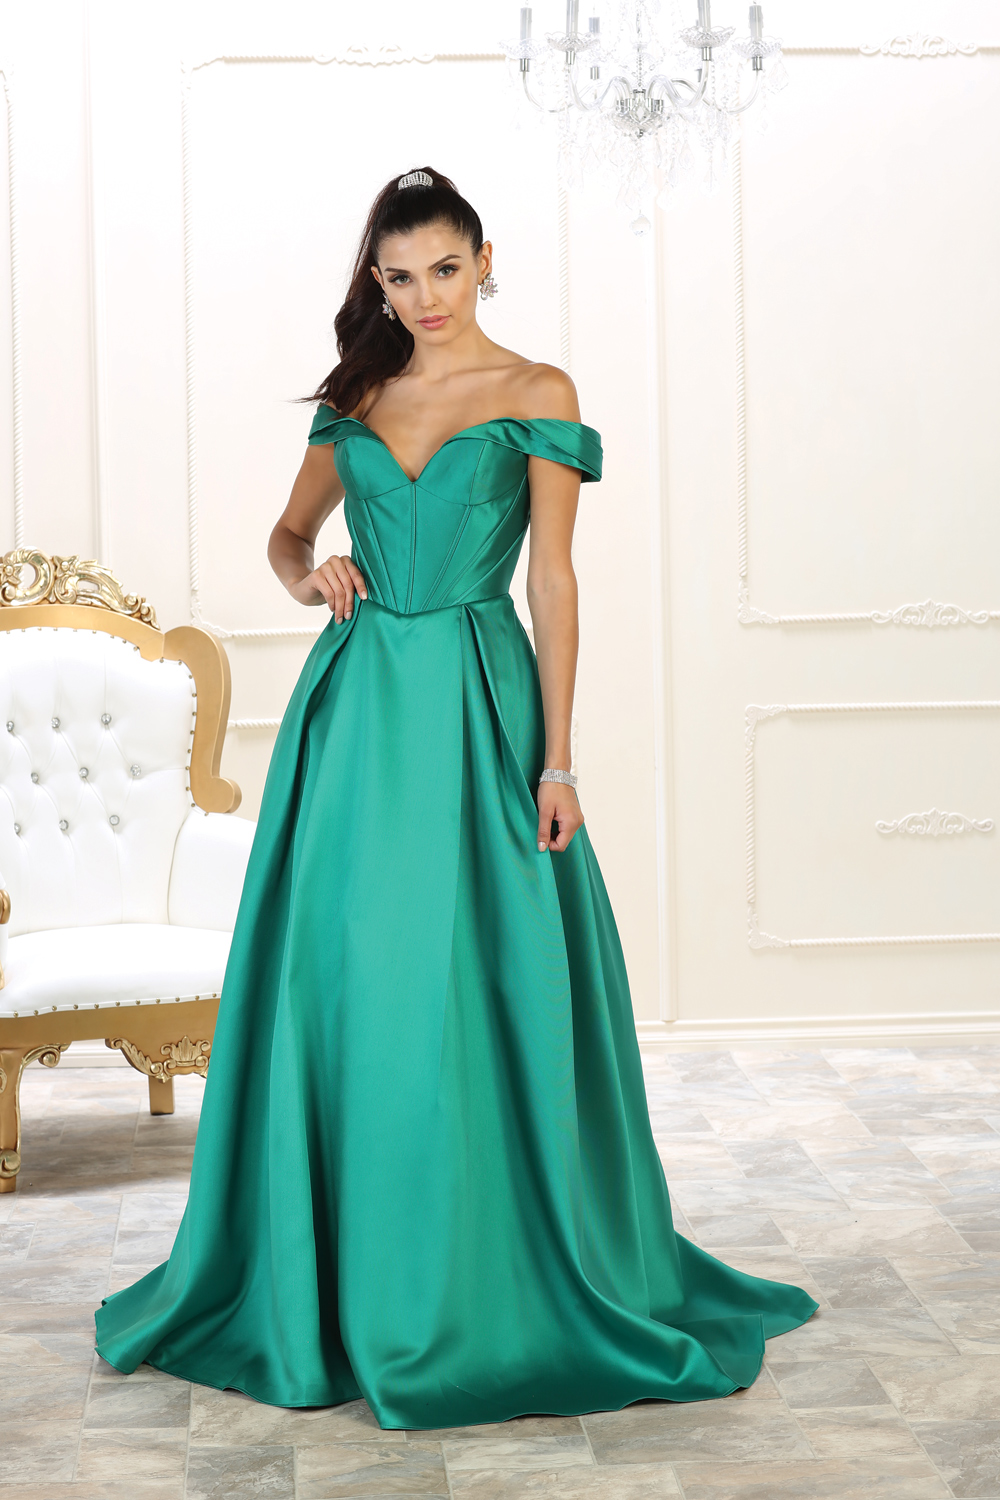 Glamorous Evening Prom Gown - Fancy ...